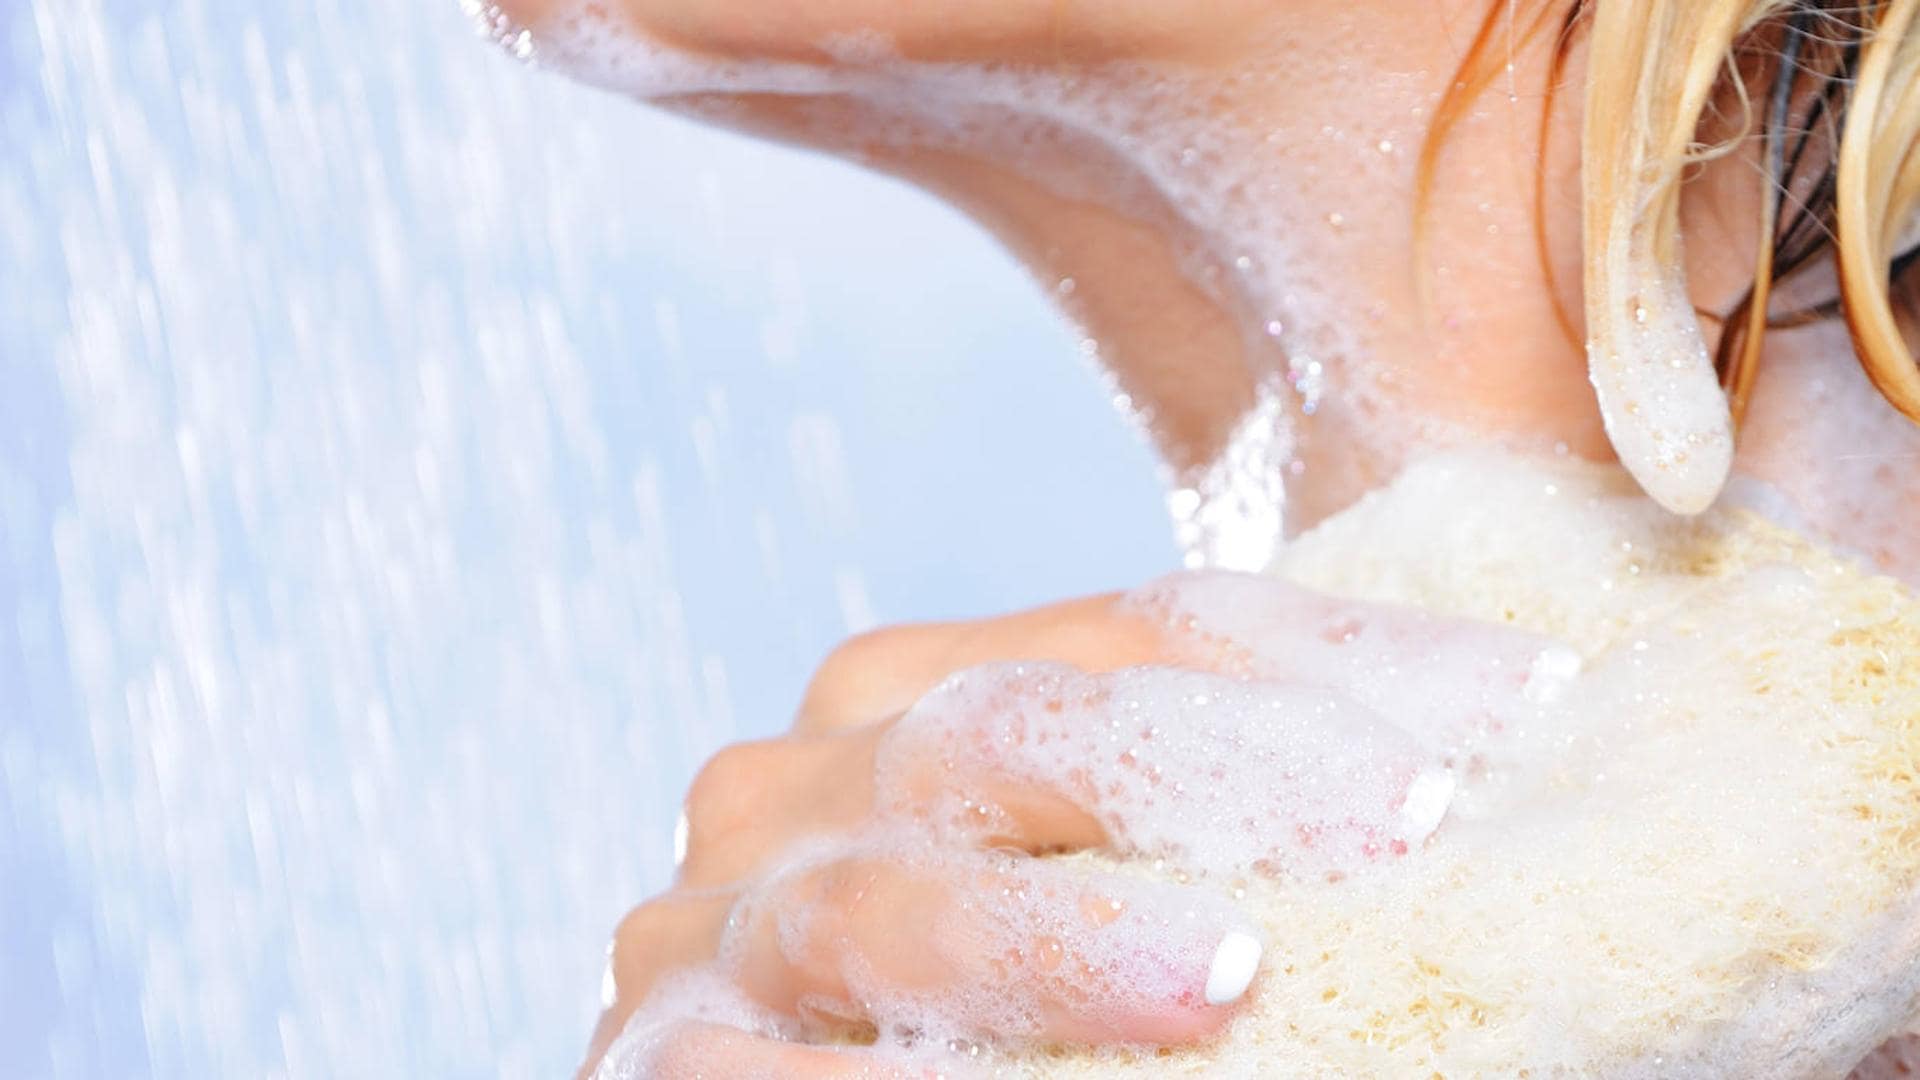 A pharmacist ends the debate about whether or not it is better to use a sponge when showering